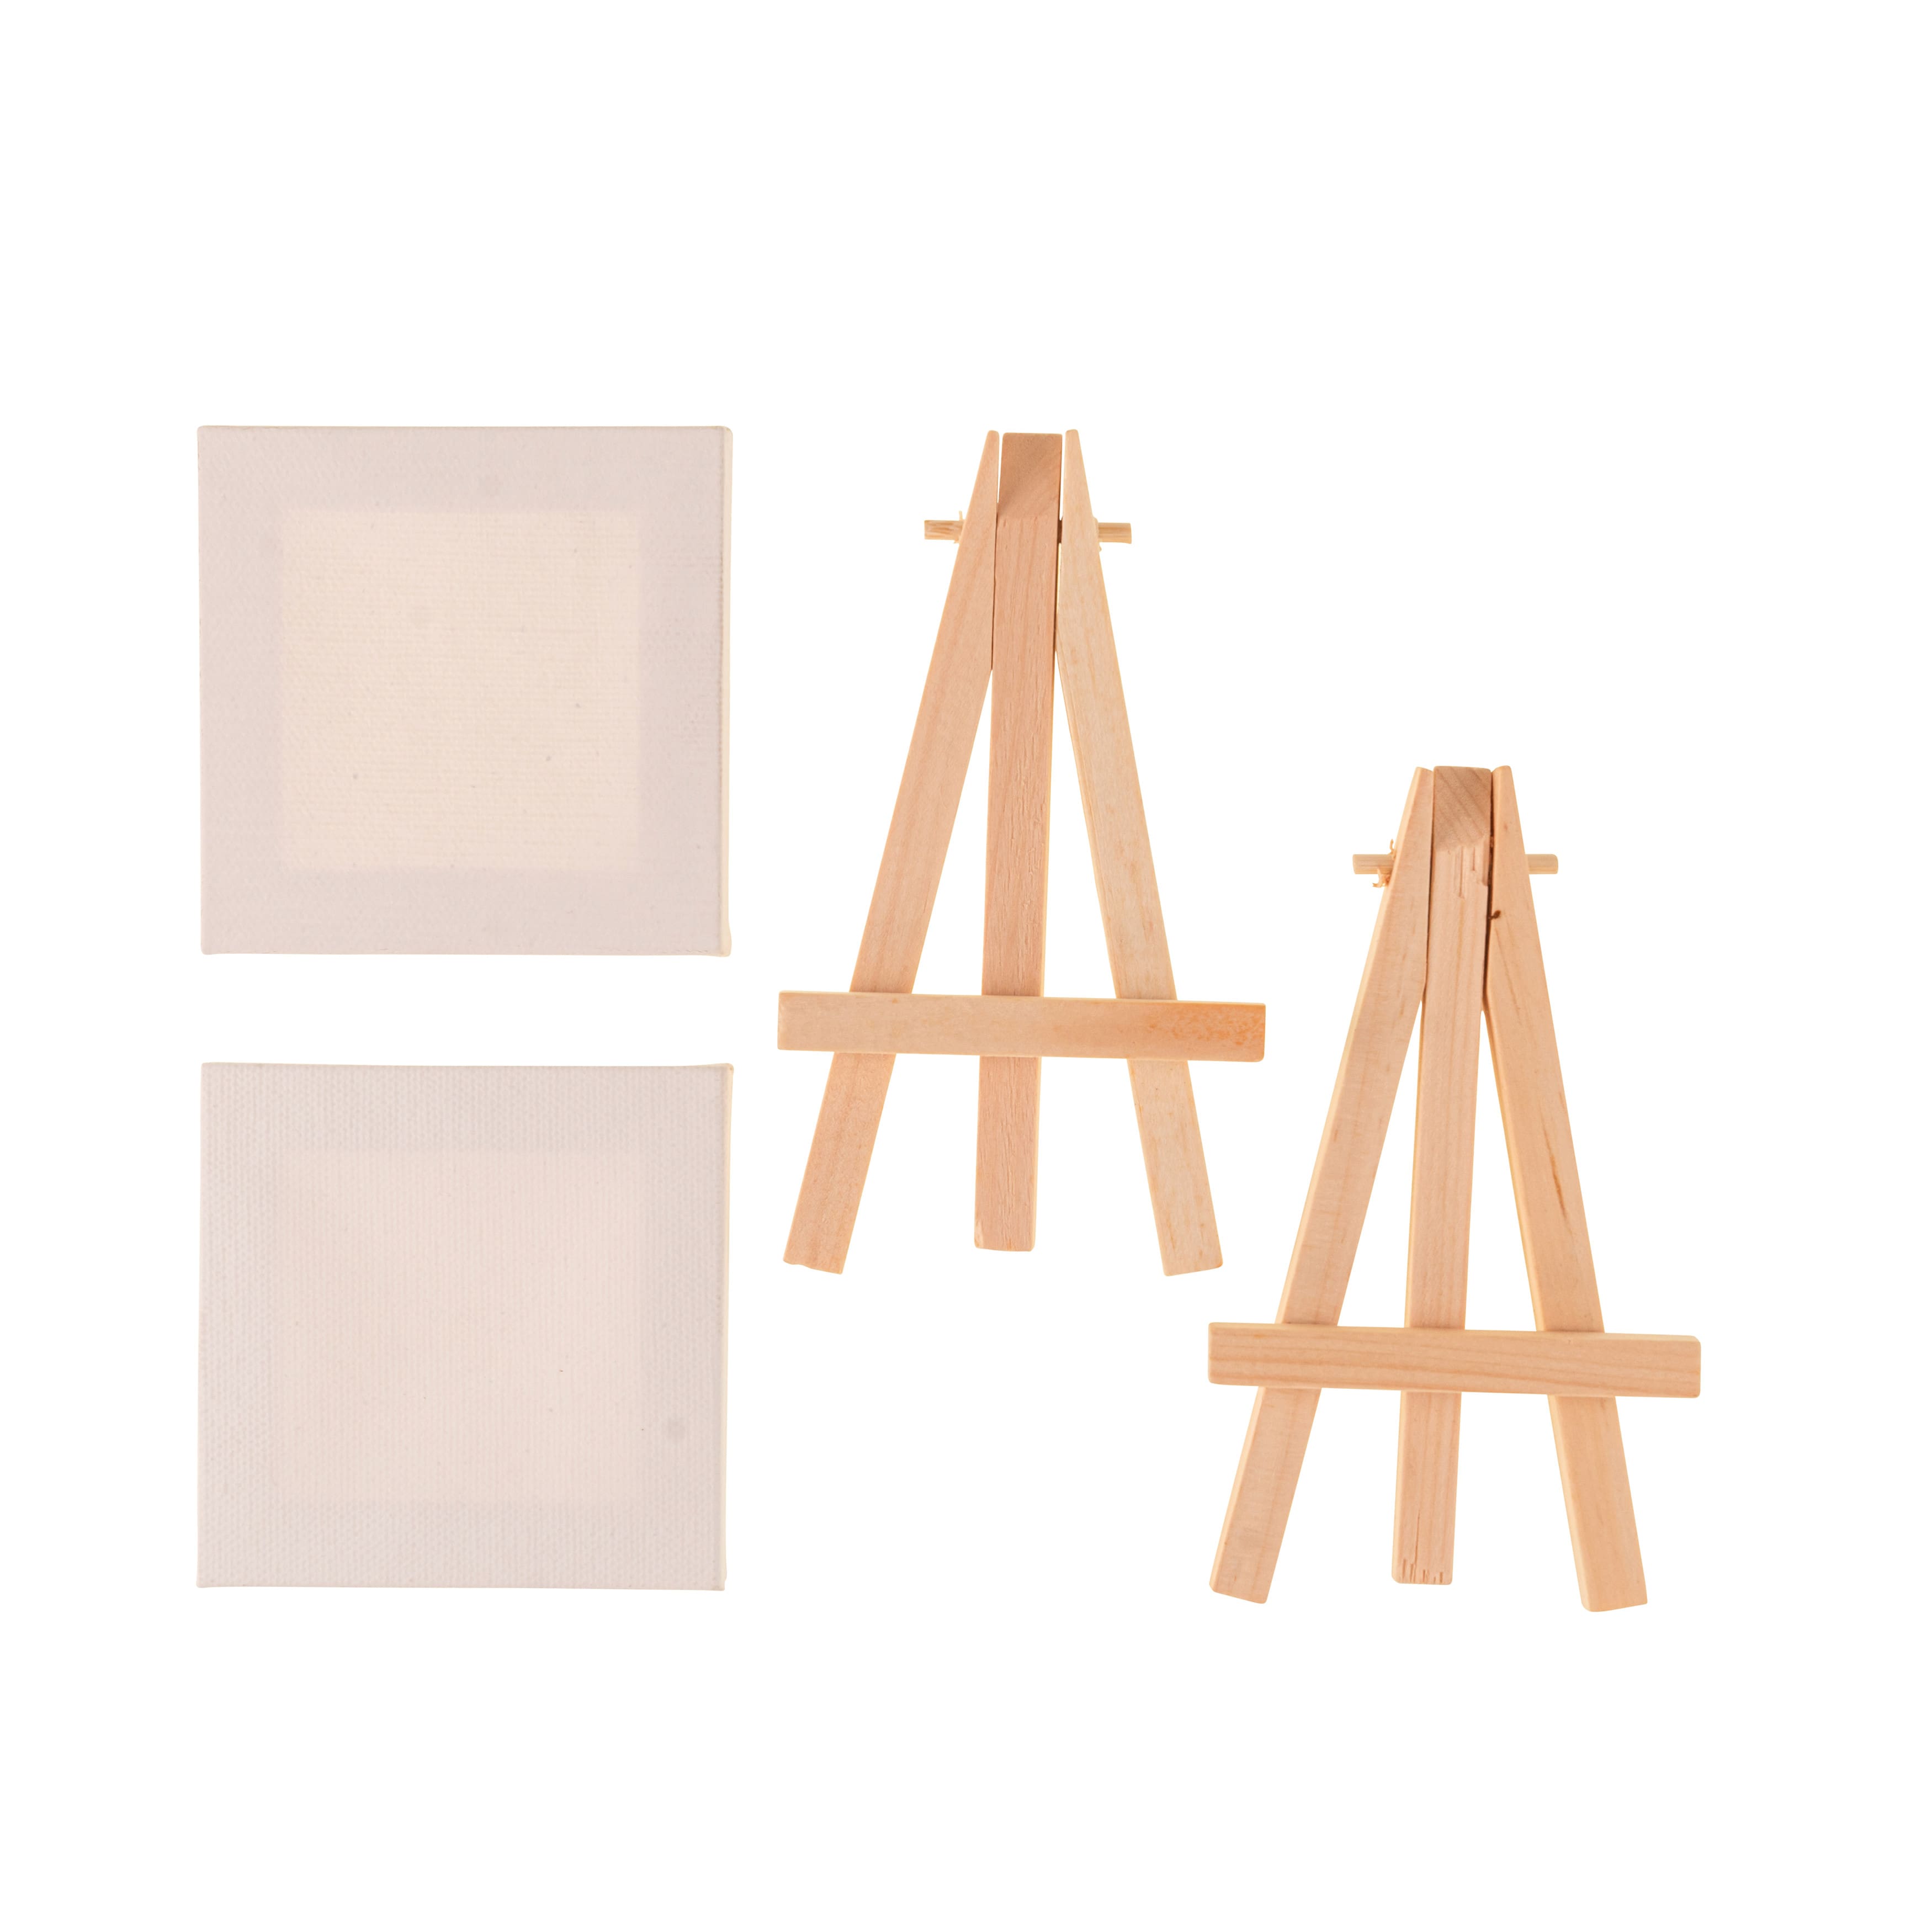 MINI CANVAS WITH EASEL/STAND - PACK OF 1 (10X10 CM)